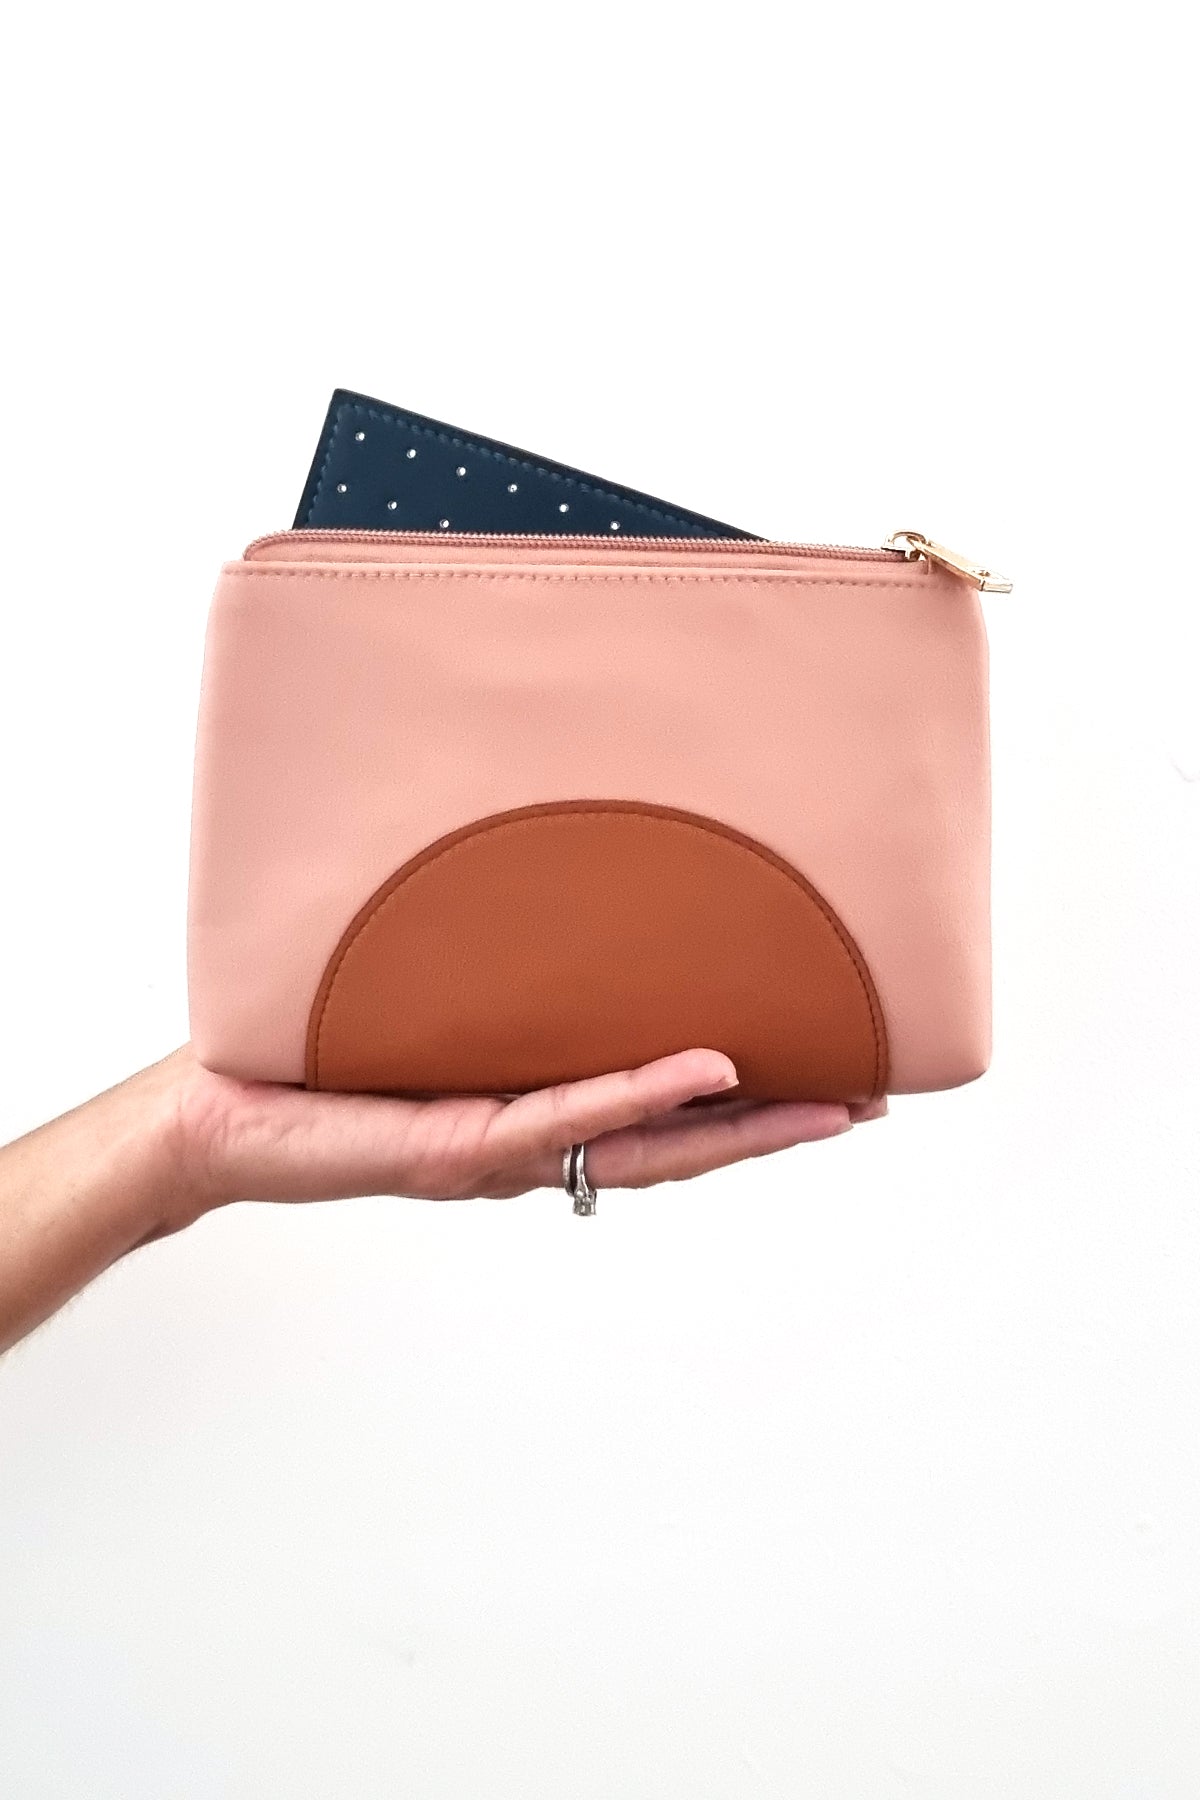 An outstretched hand holds a pink purse against a white background. The purse has a tan half circle on the bottom and a gold zip, it has a forest green perforated insert poking out the top of the open zip.